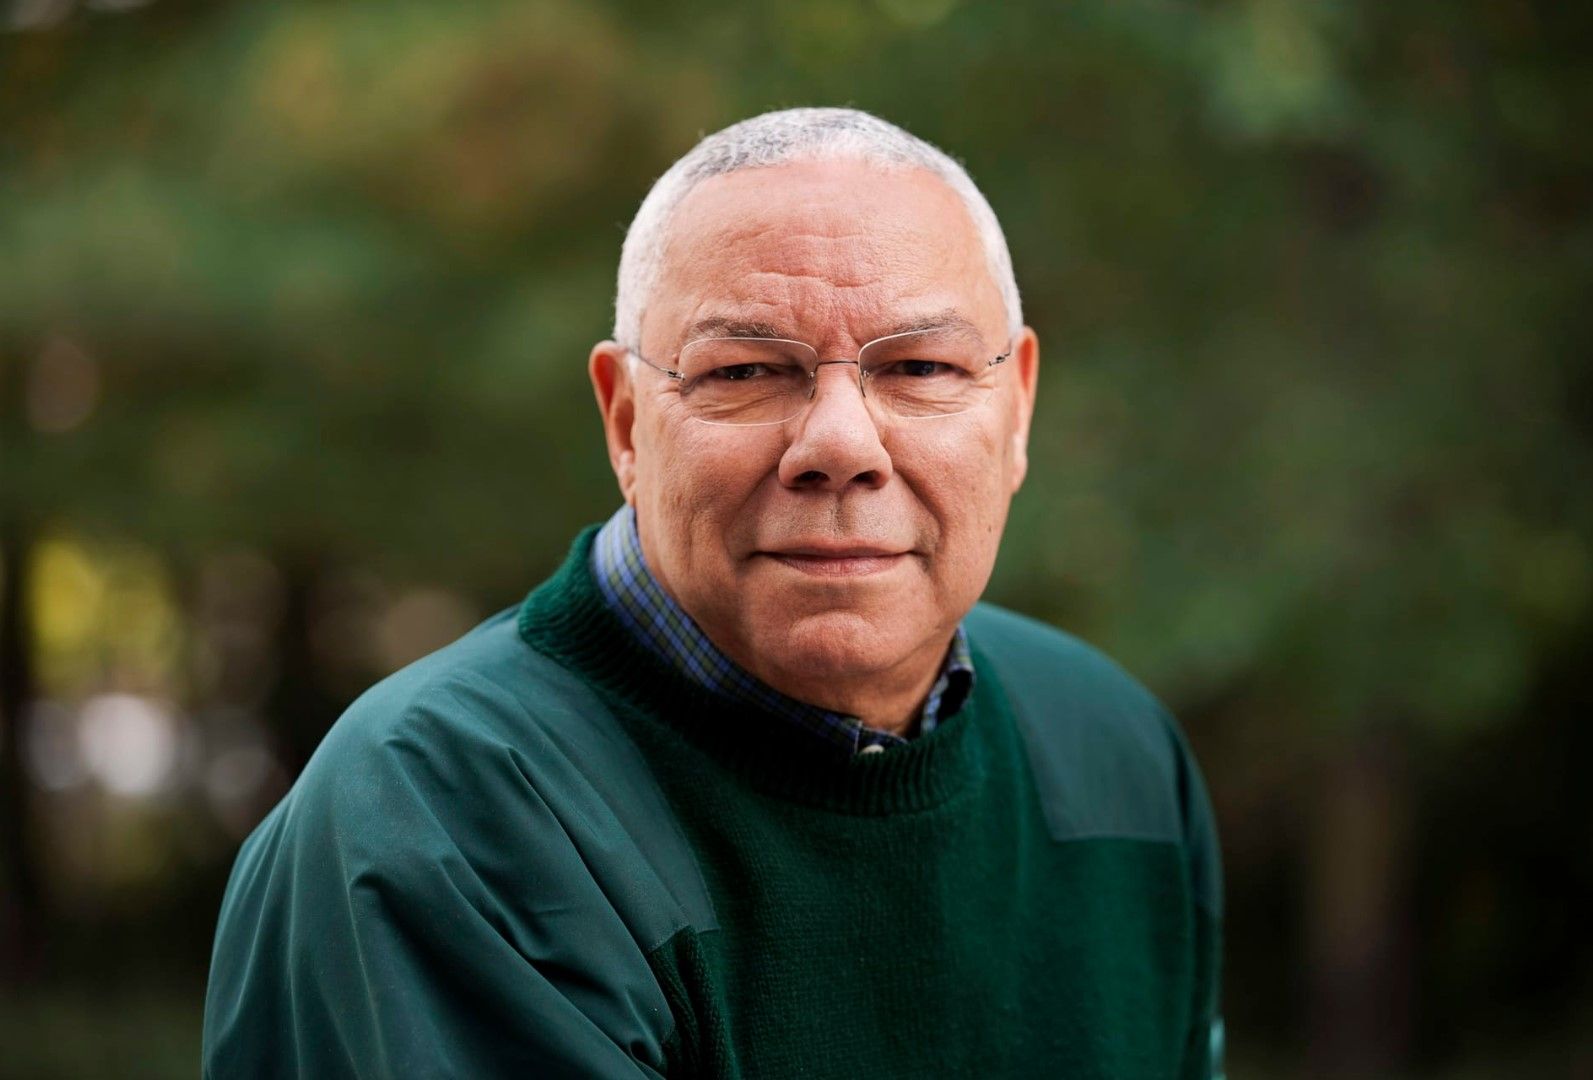 Colin Powell, four-star general and first black chairman of the Joint Chiefs of Staff, dead at 84